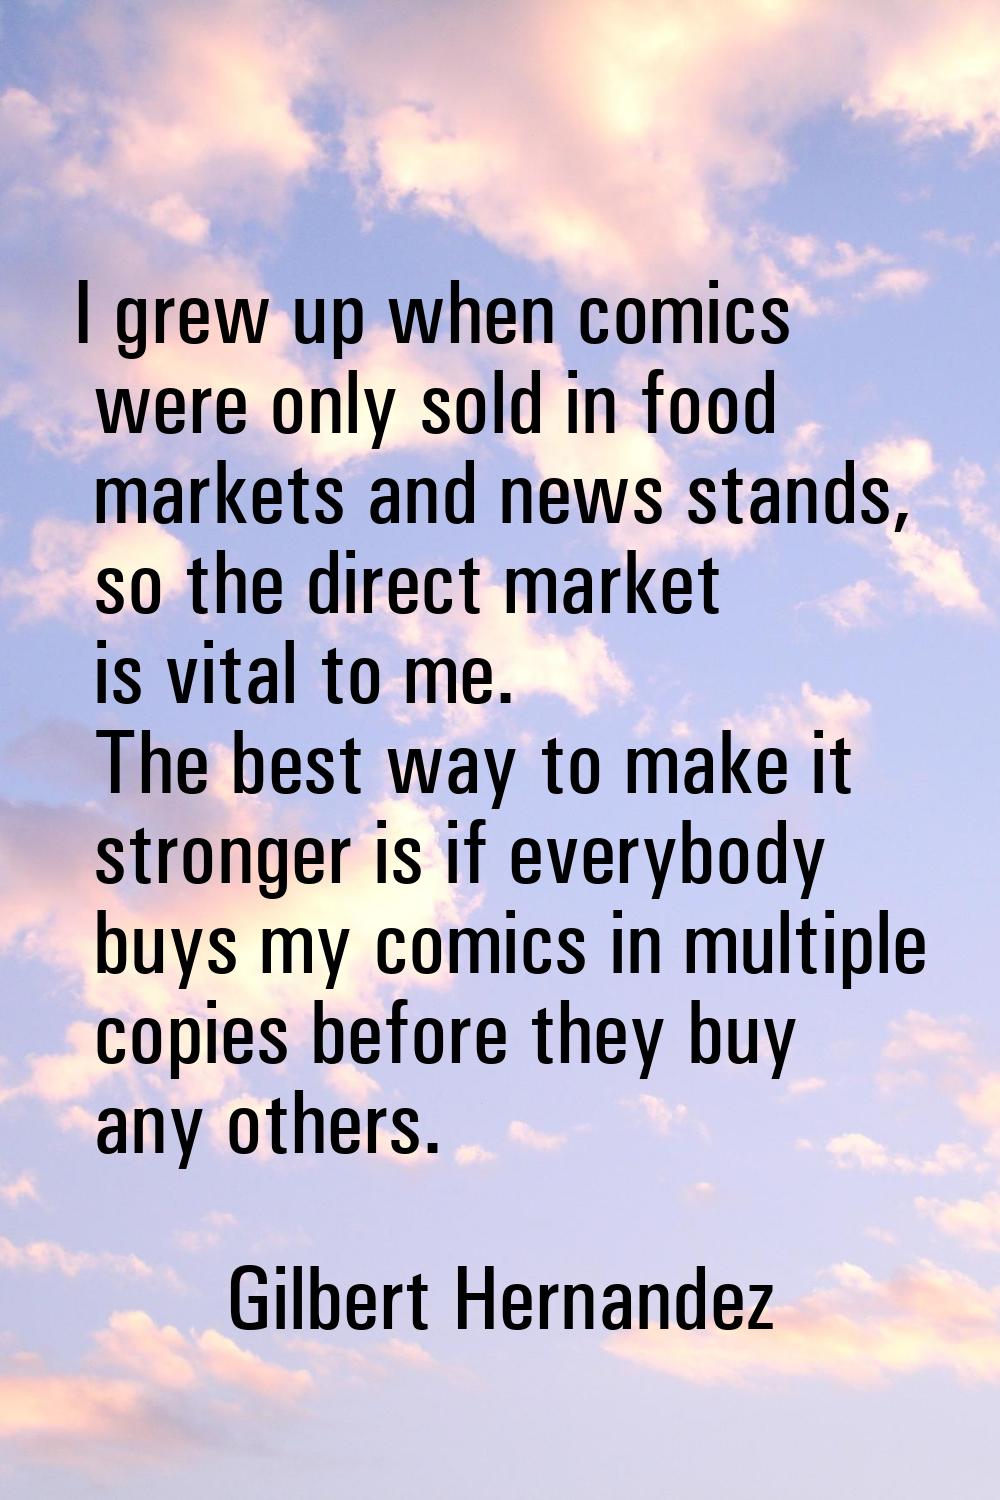 I grew up when comics were only sold in food markets and news stands, so the direct market is vital